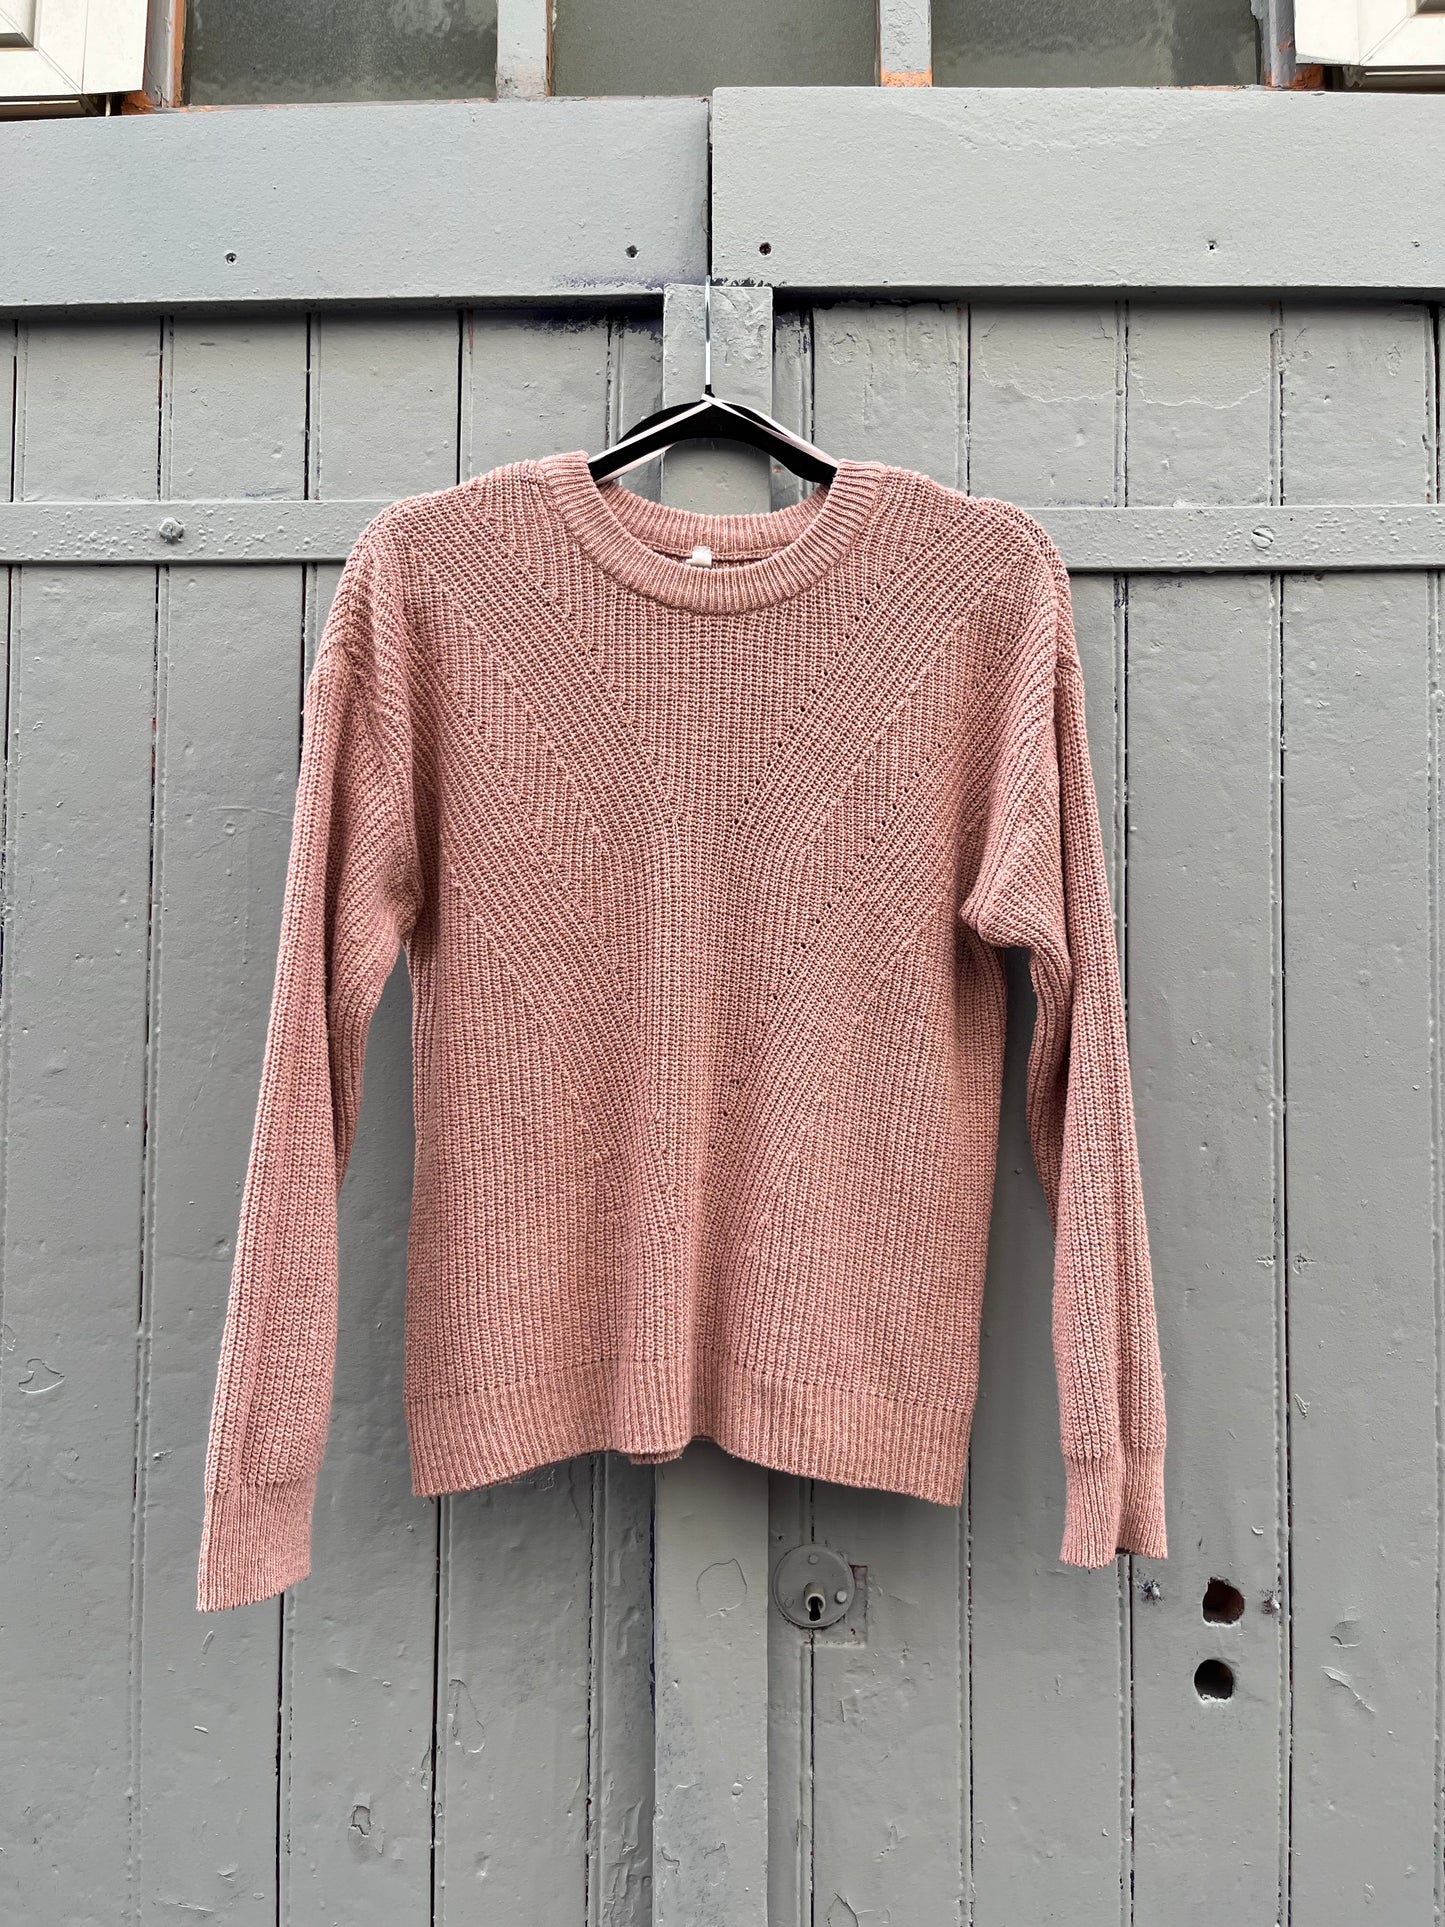 Le pull, DF YOUNG, taille 36